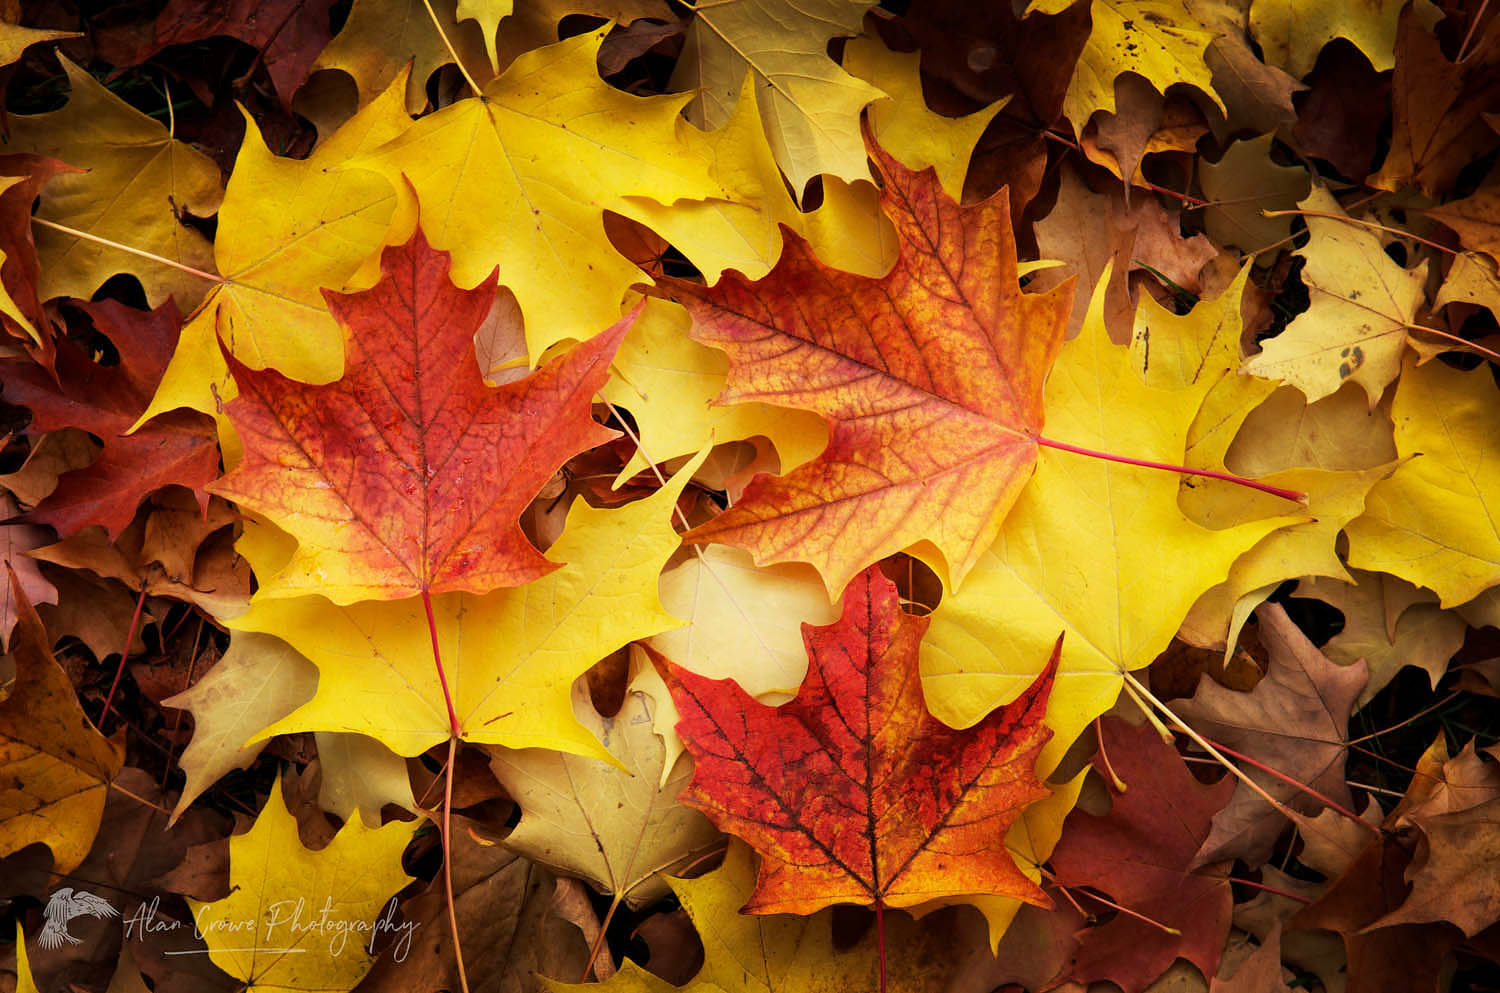 Red, Orange, and yellow maples leaves in Autumn #56501